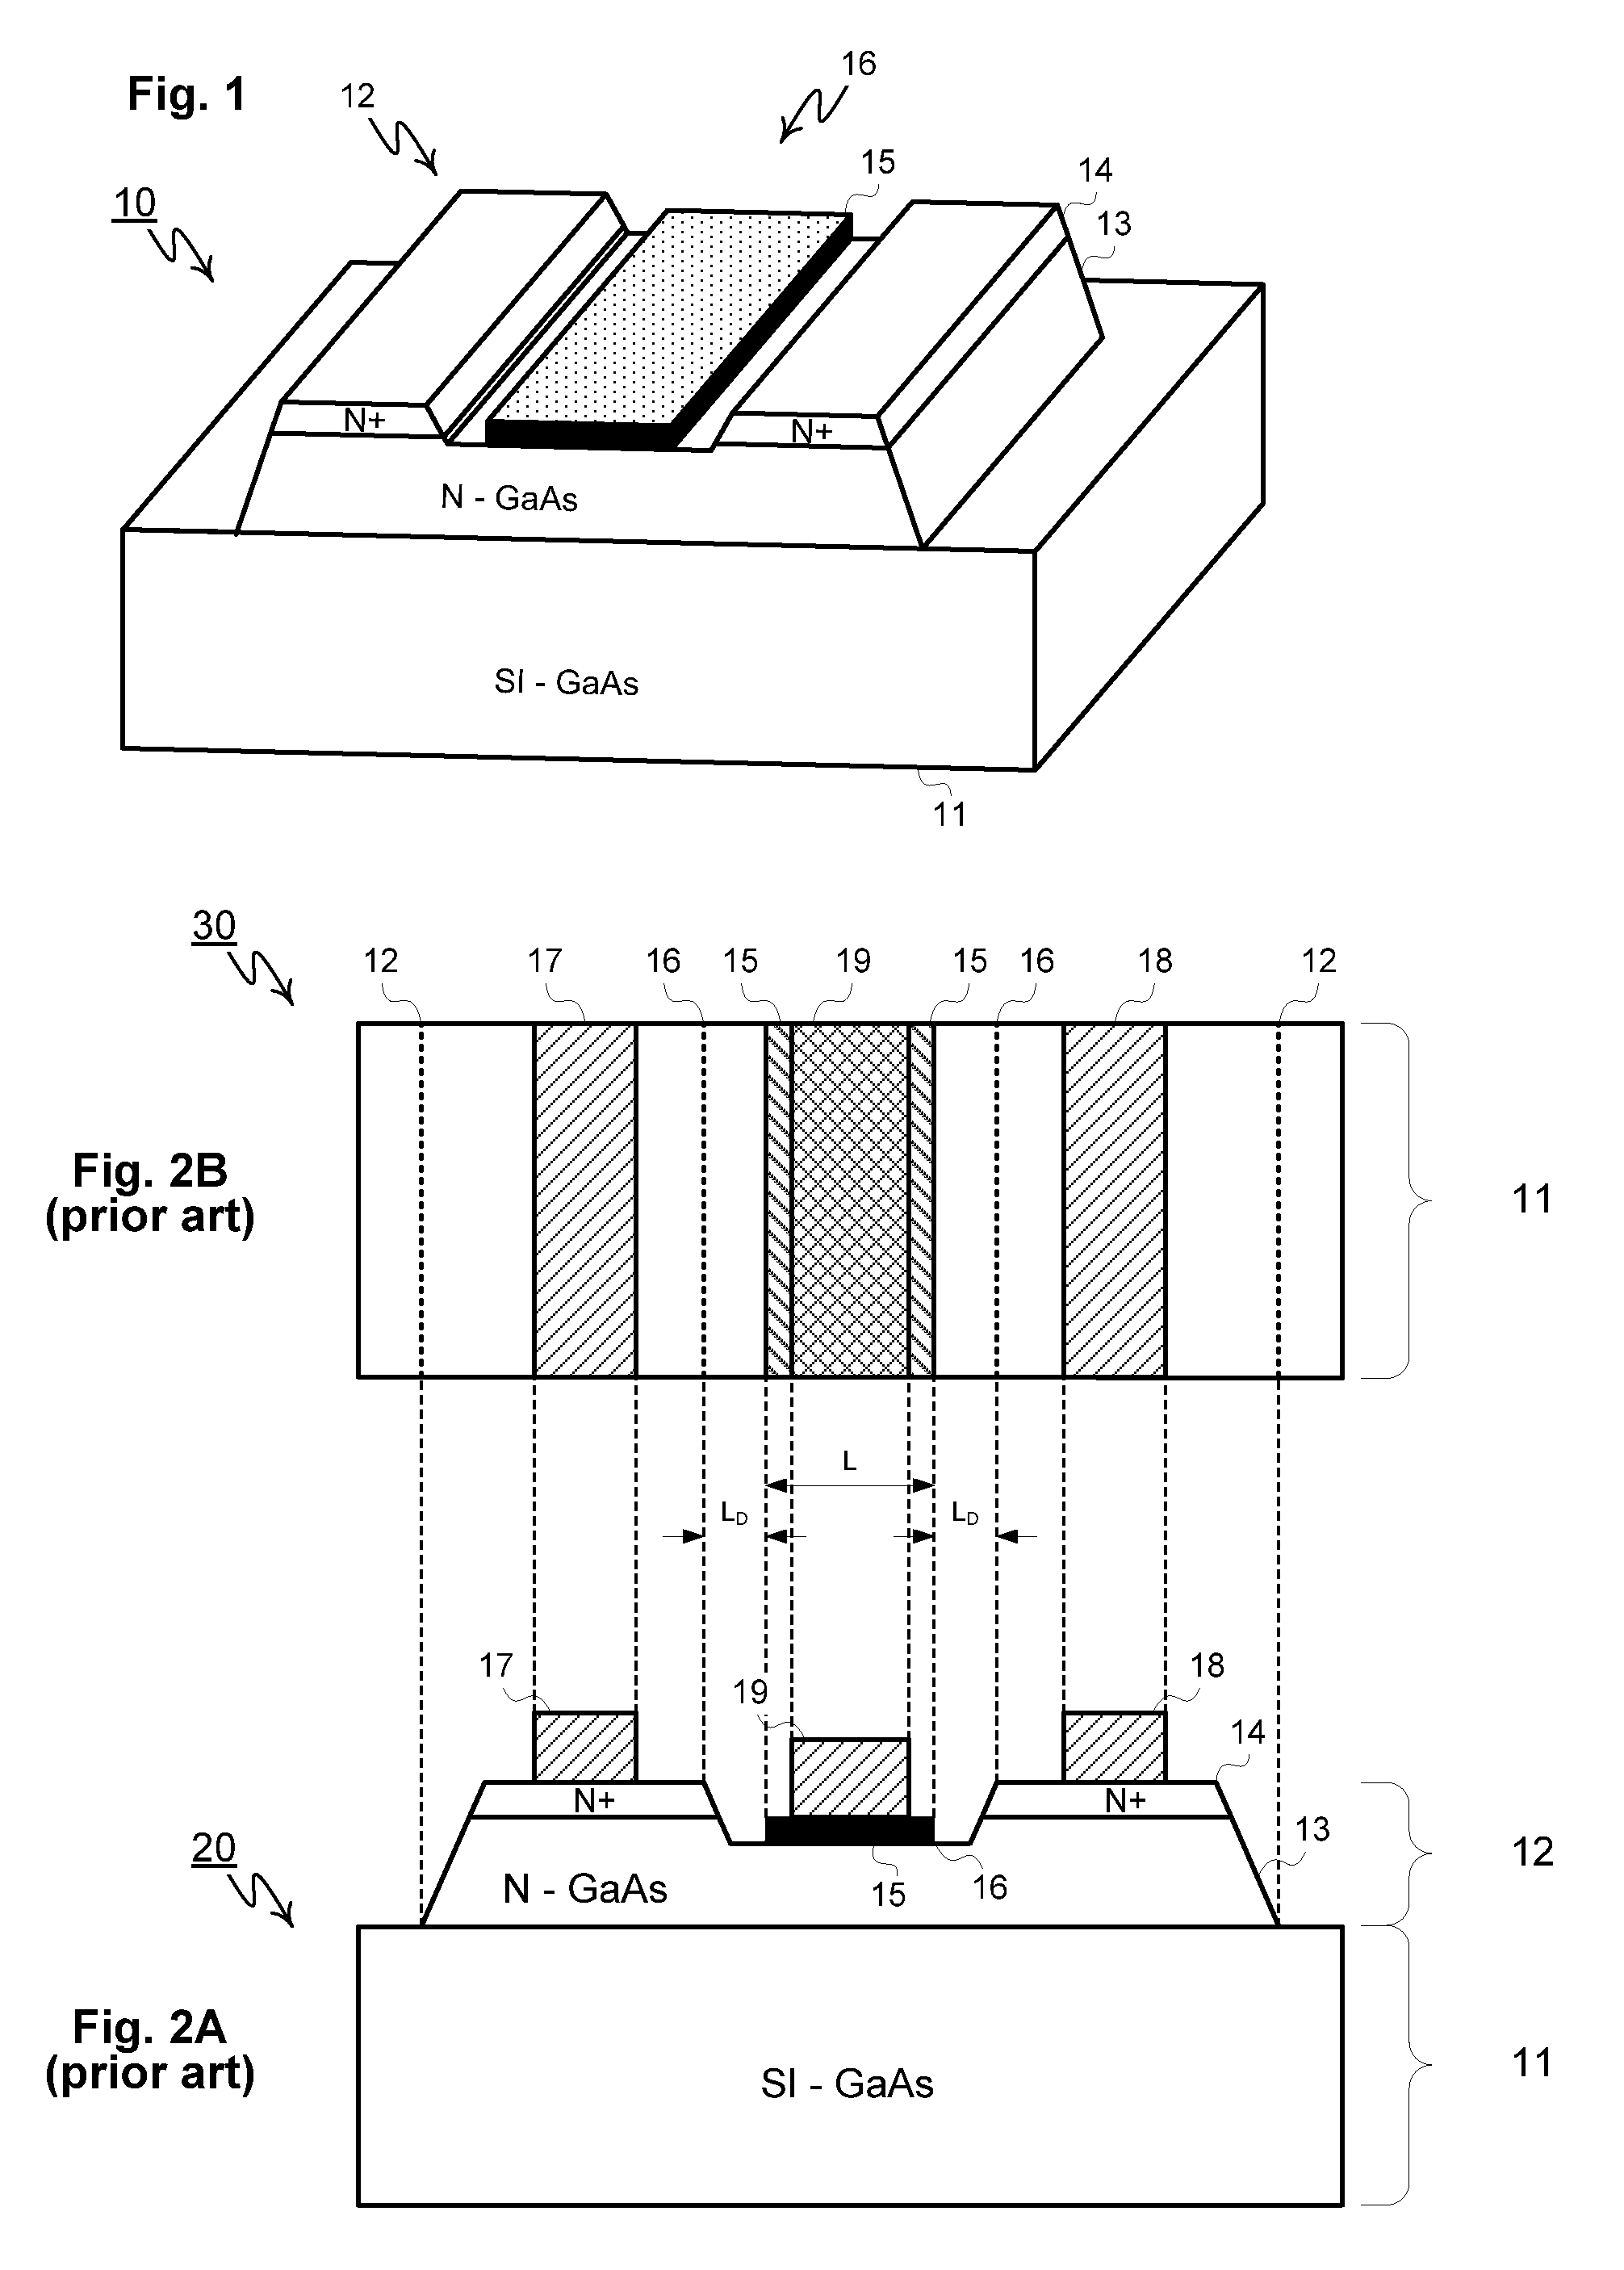 Merged and Isolated Power MESFET Devices